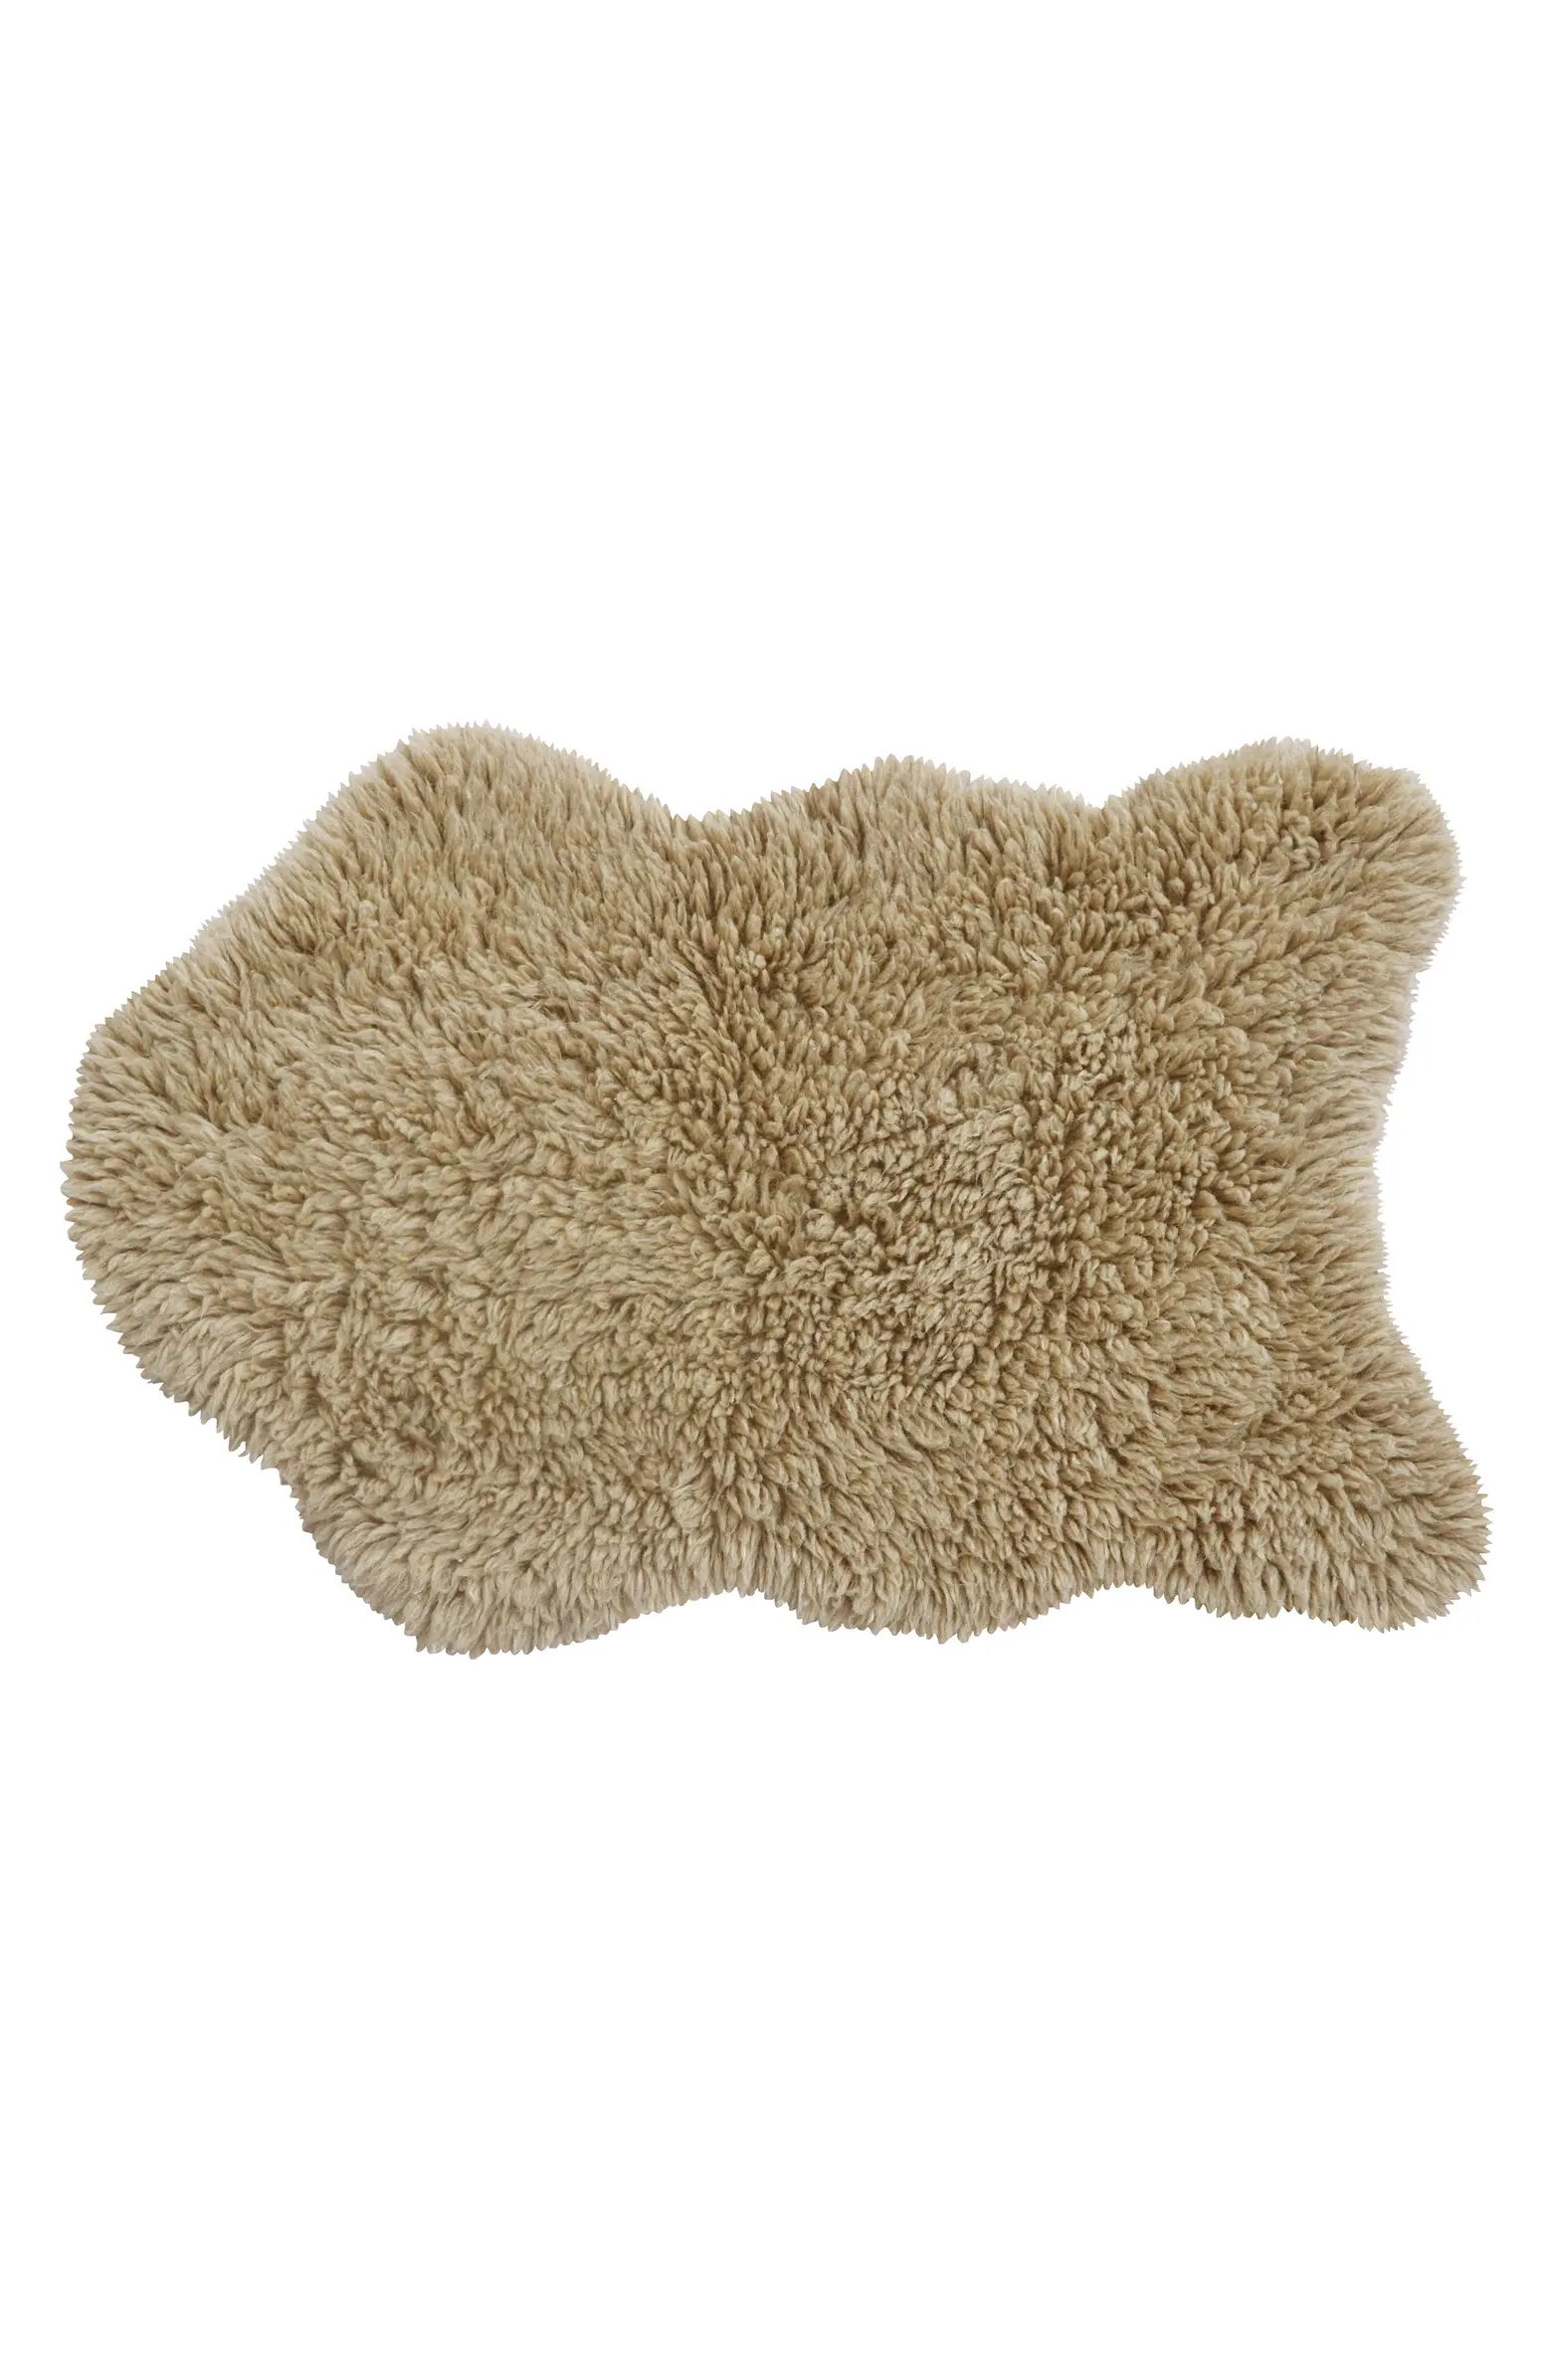 Woolly Woolable Washable Wool Rug | Nordstrom